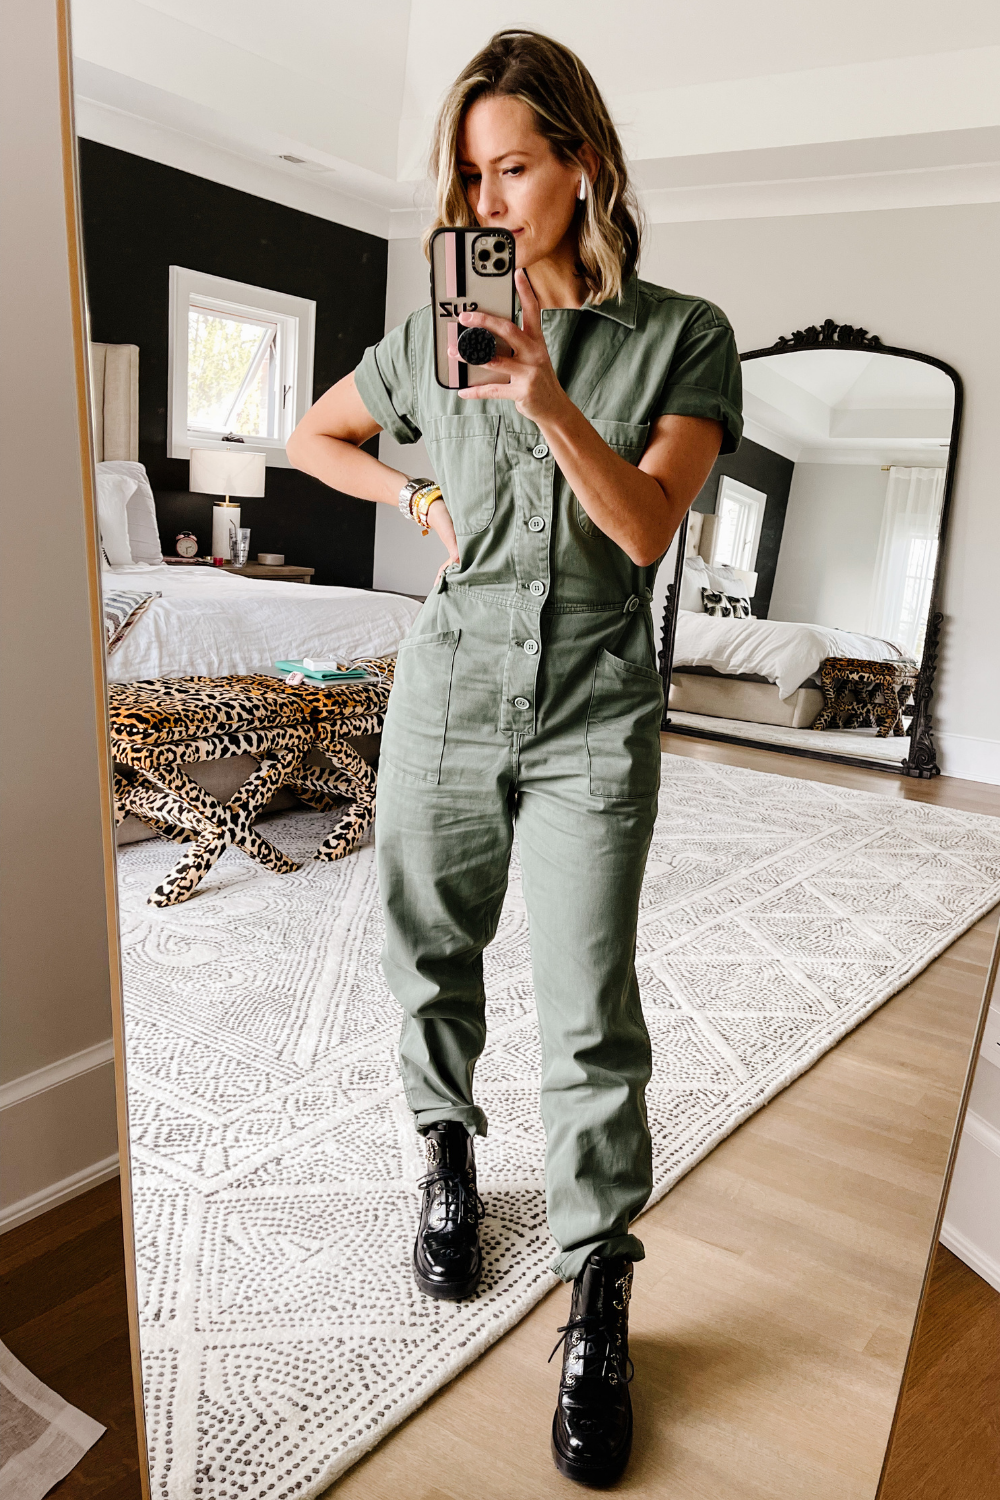 Suzanne wearing a jumpsuit